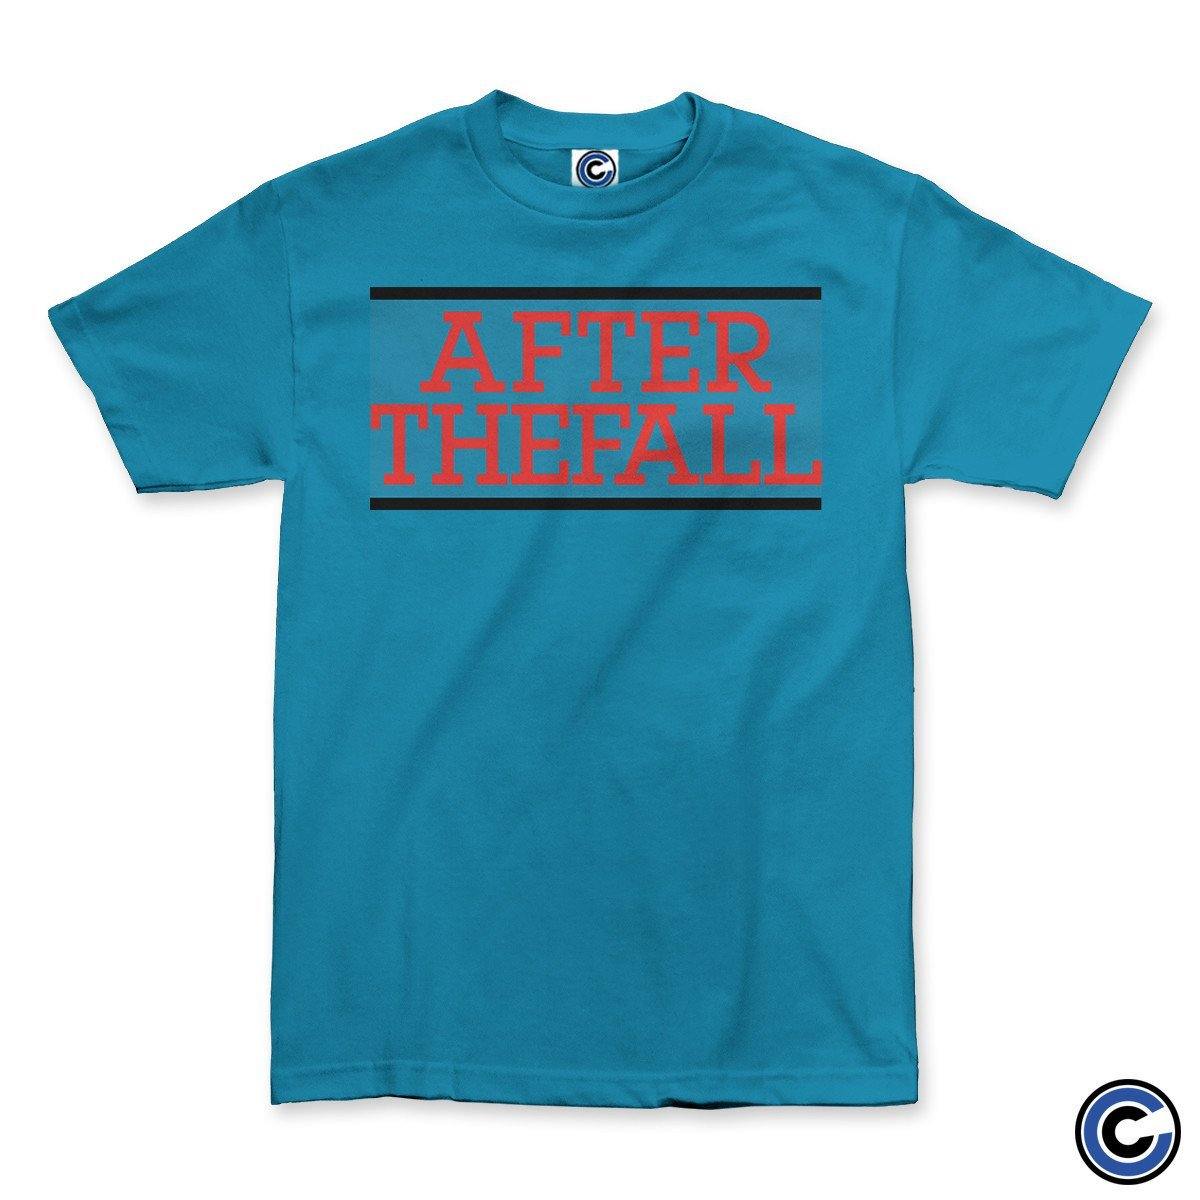 Buy – After The Fall "Adolescents" Shirt – Band & Music Merch – Cold Cuts Merch